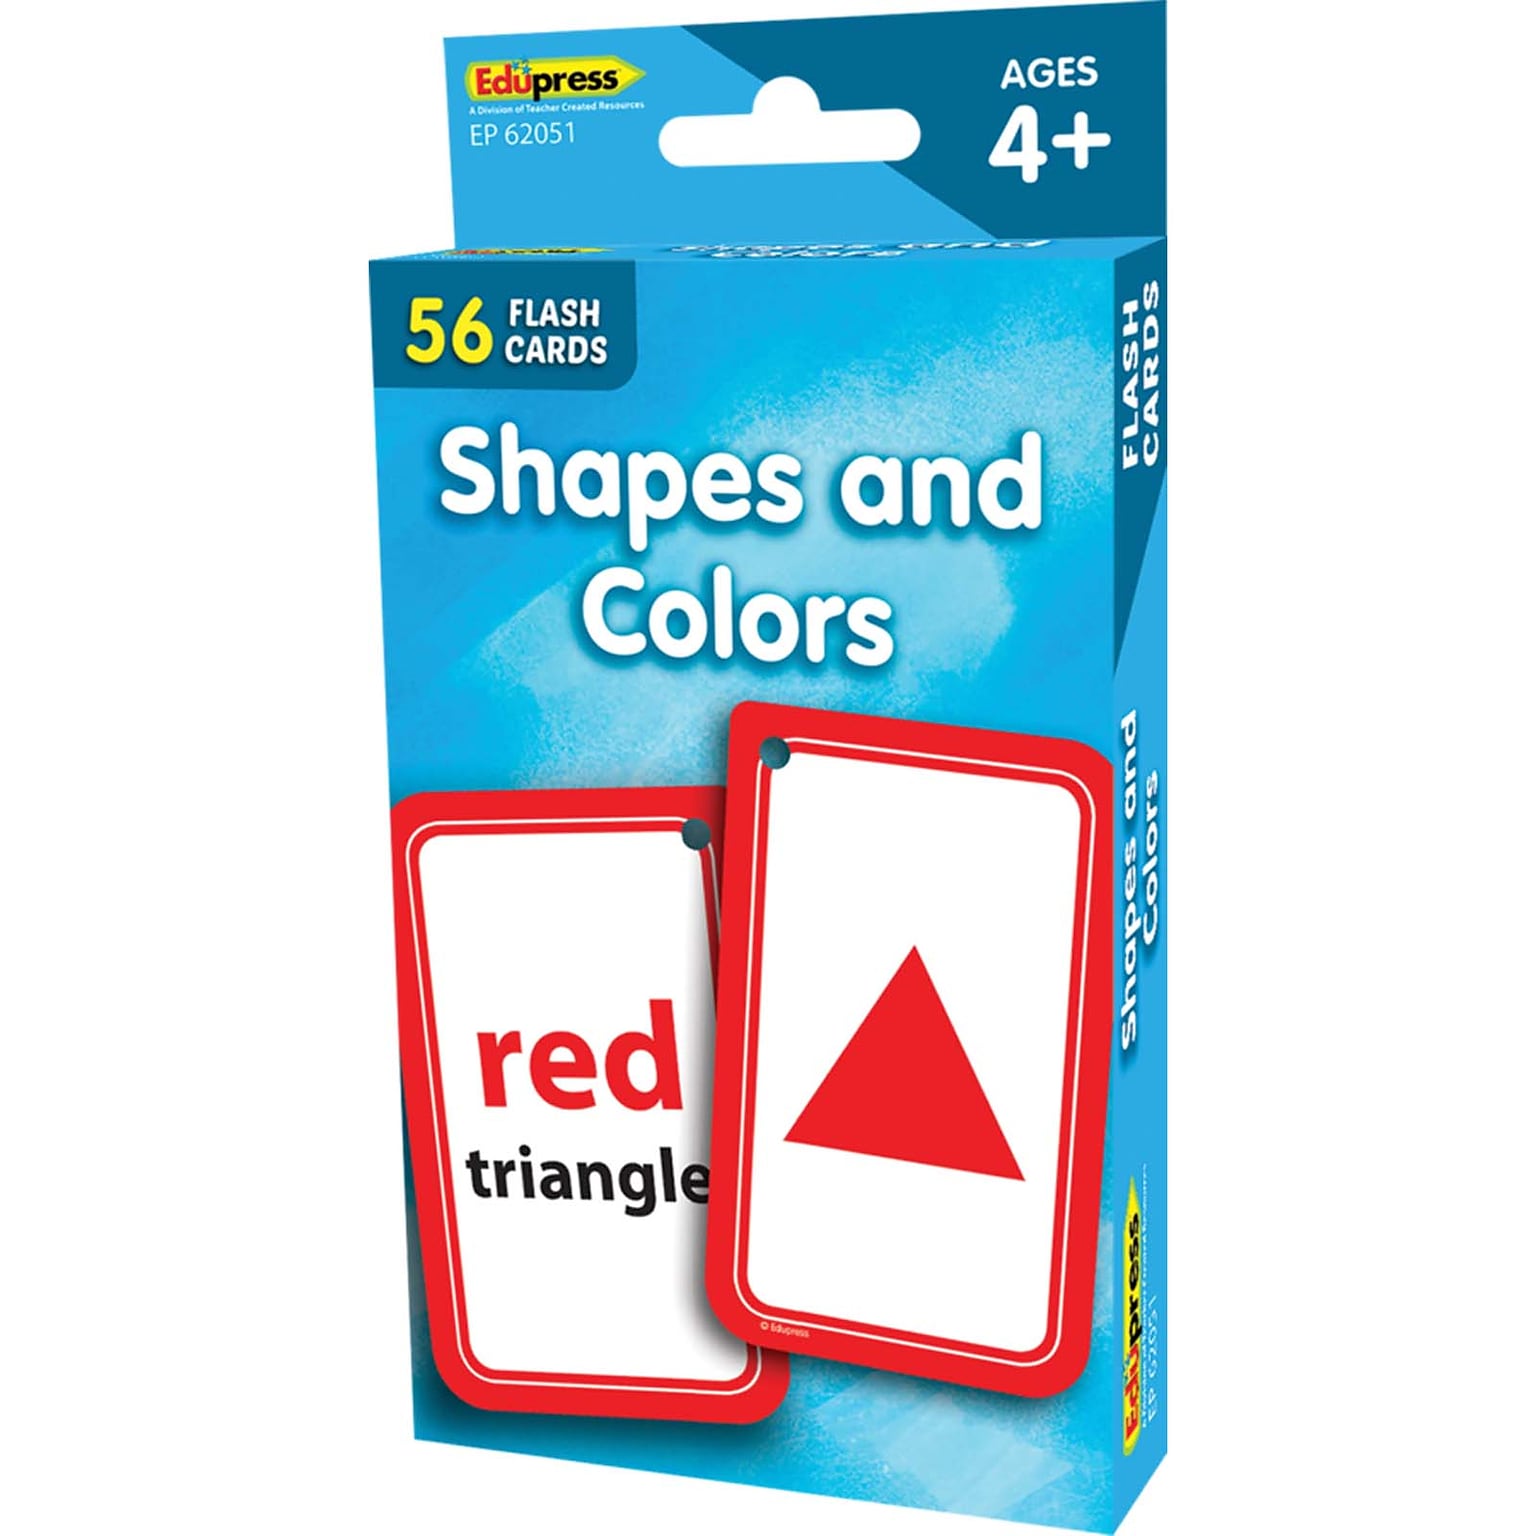 Edupress Shapes and Colors Flash Cards, 56 Cards (TCR62051)